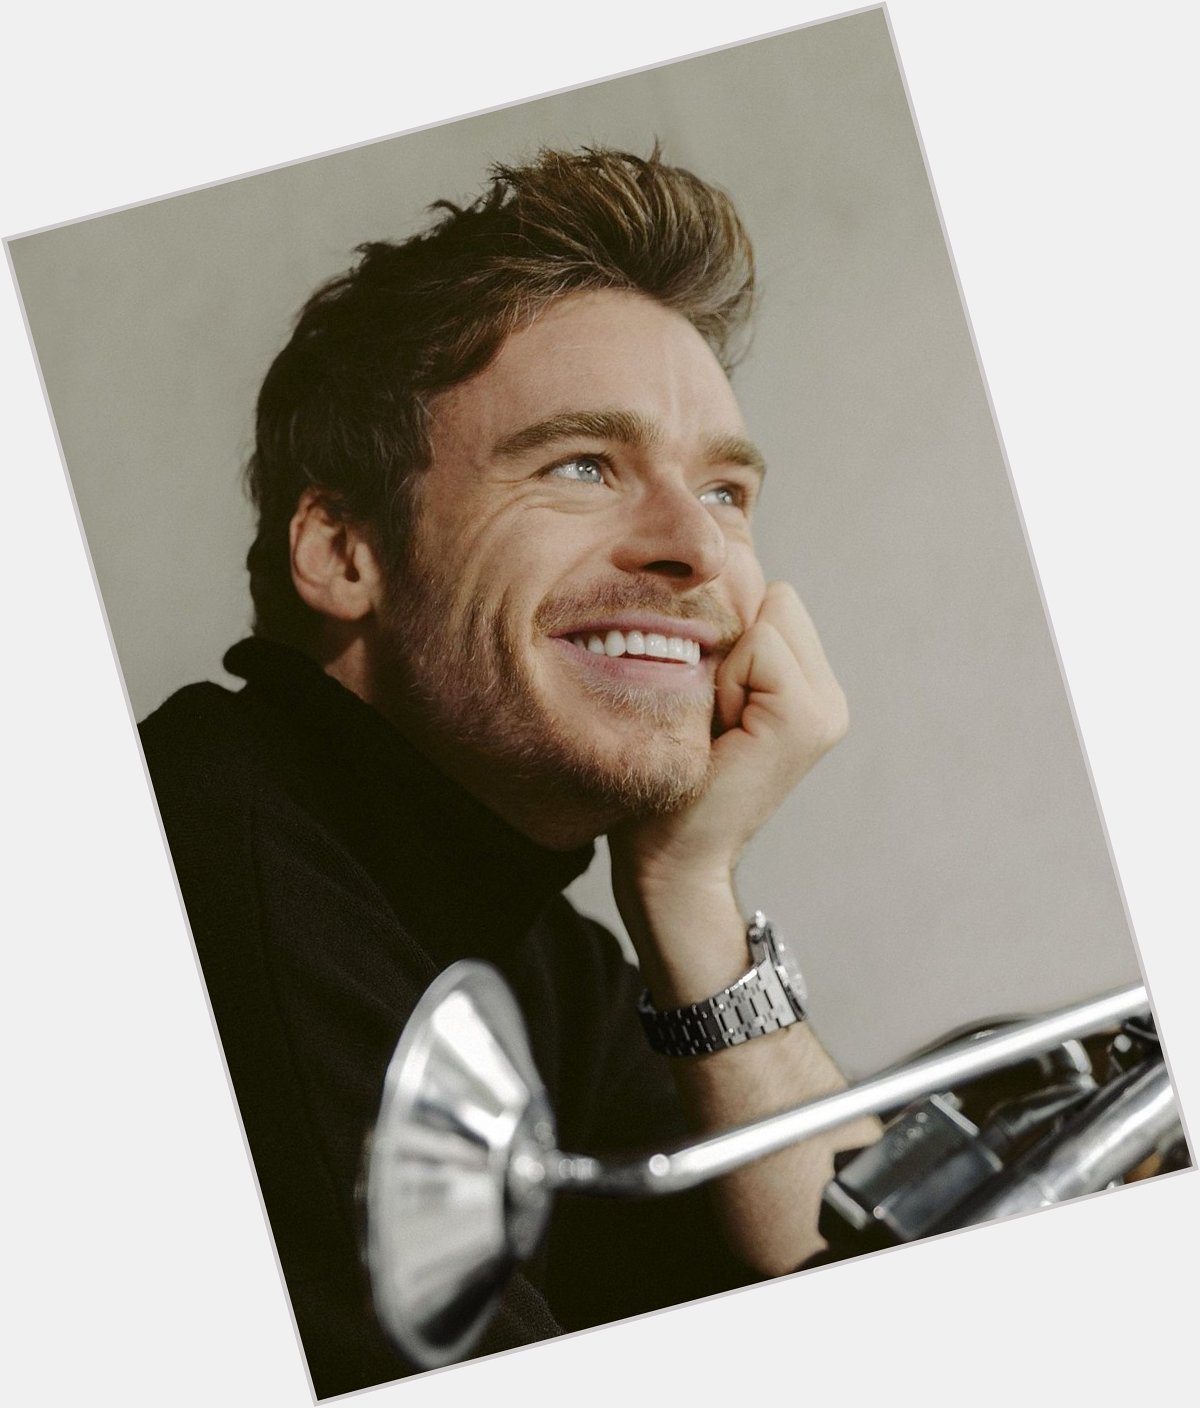 Richard Madden turns 33 today happy birthday to the king in the north 